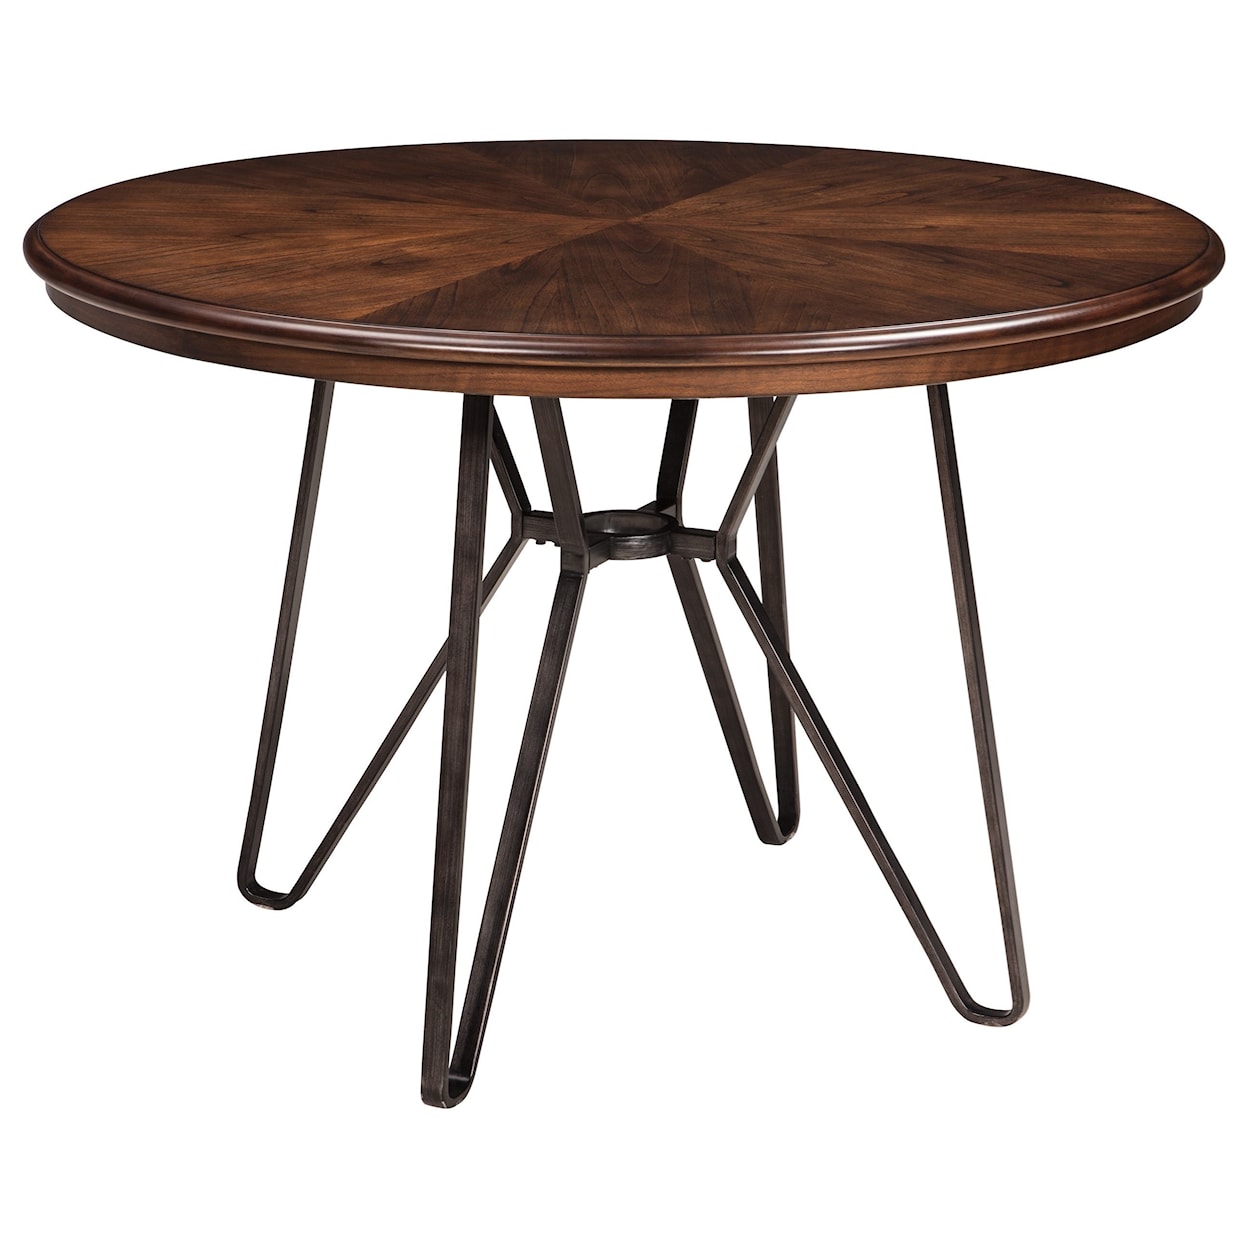 Signature Design by Ashley Centiar 5-Piece Round Dining Table Set